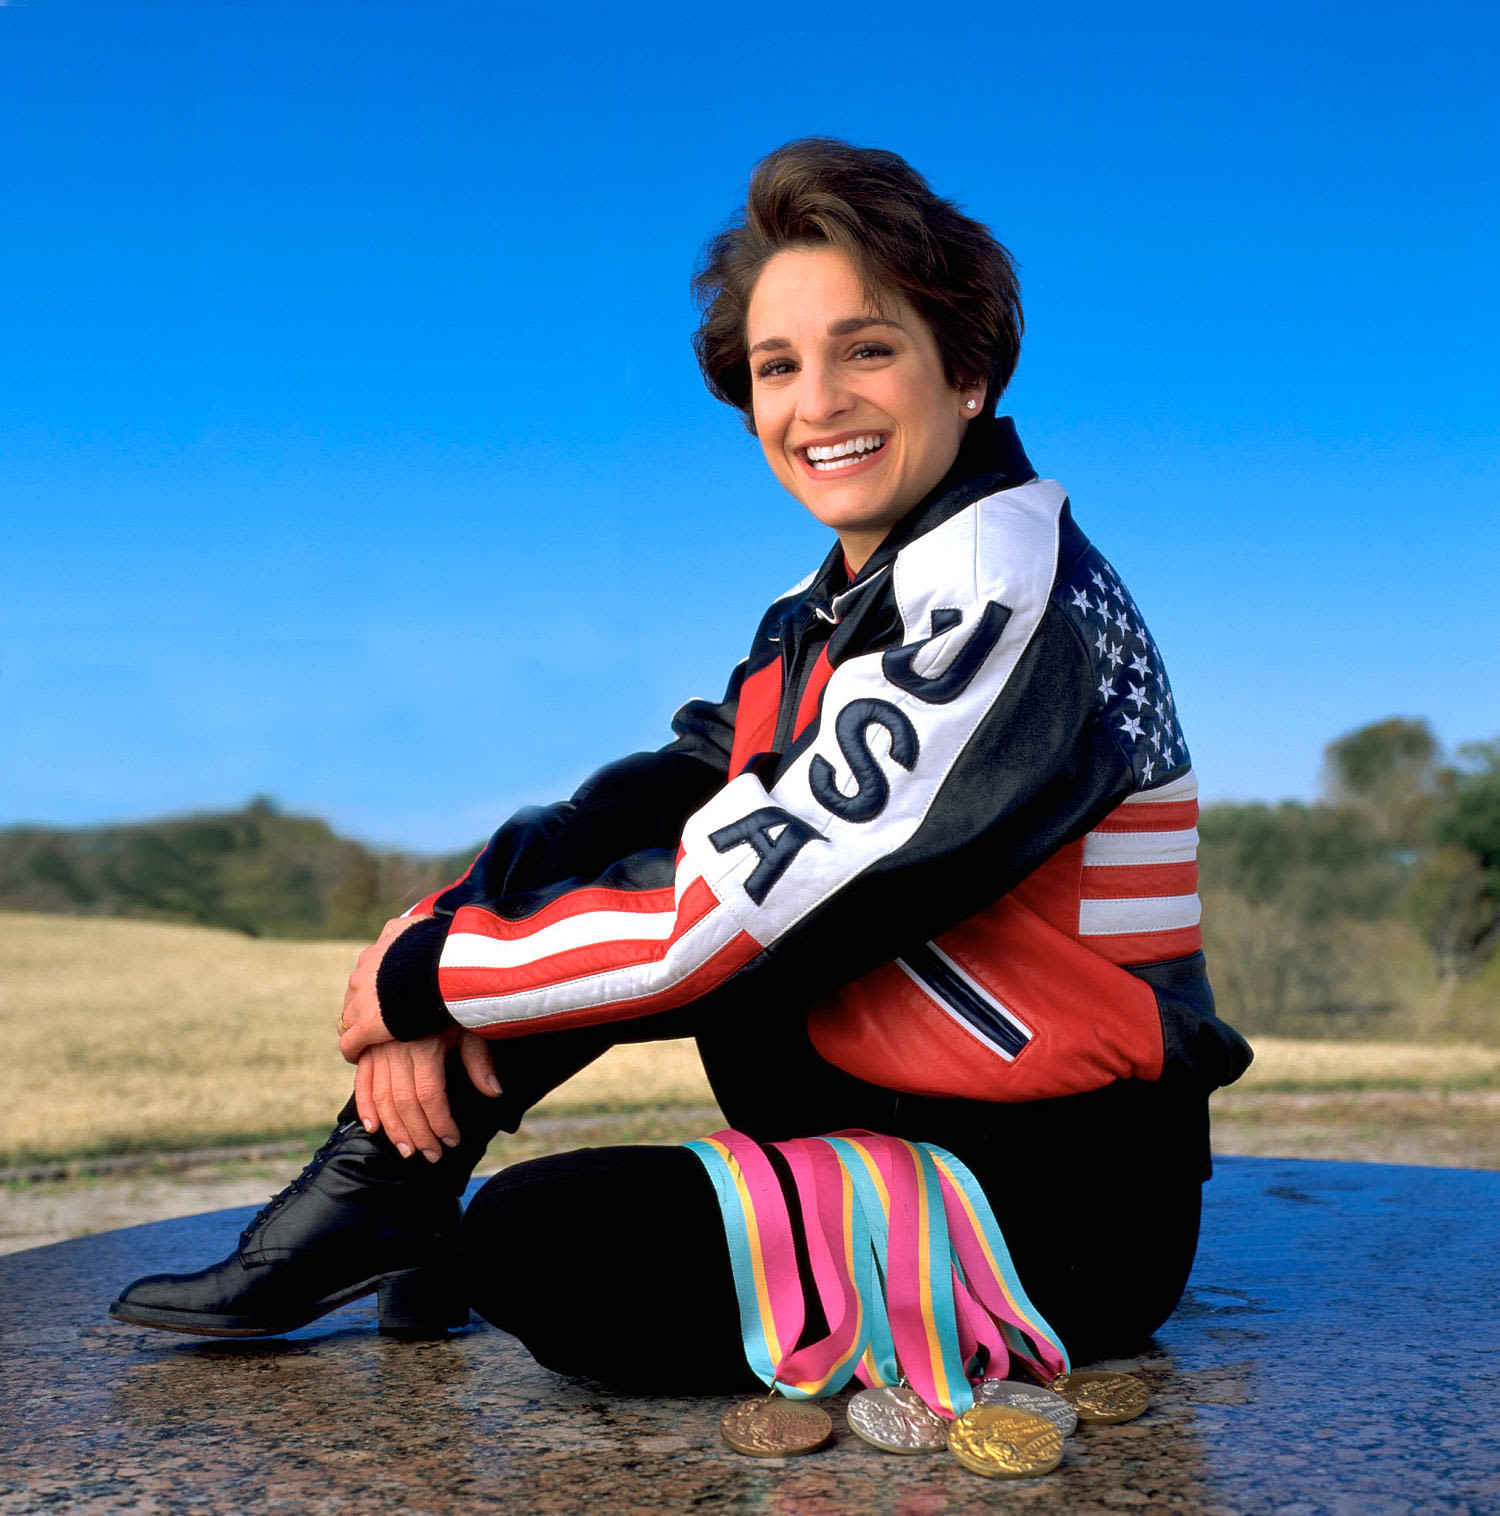 Mary Lou Retton gives update on her health: 'They still don't know what's wrong with me'